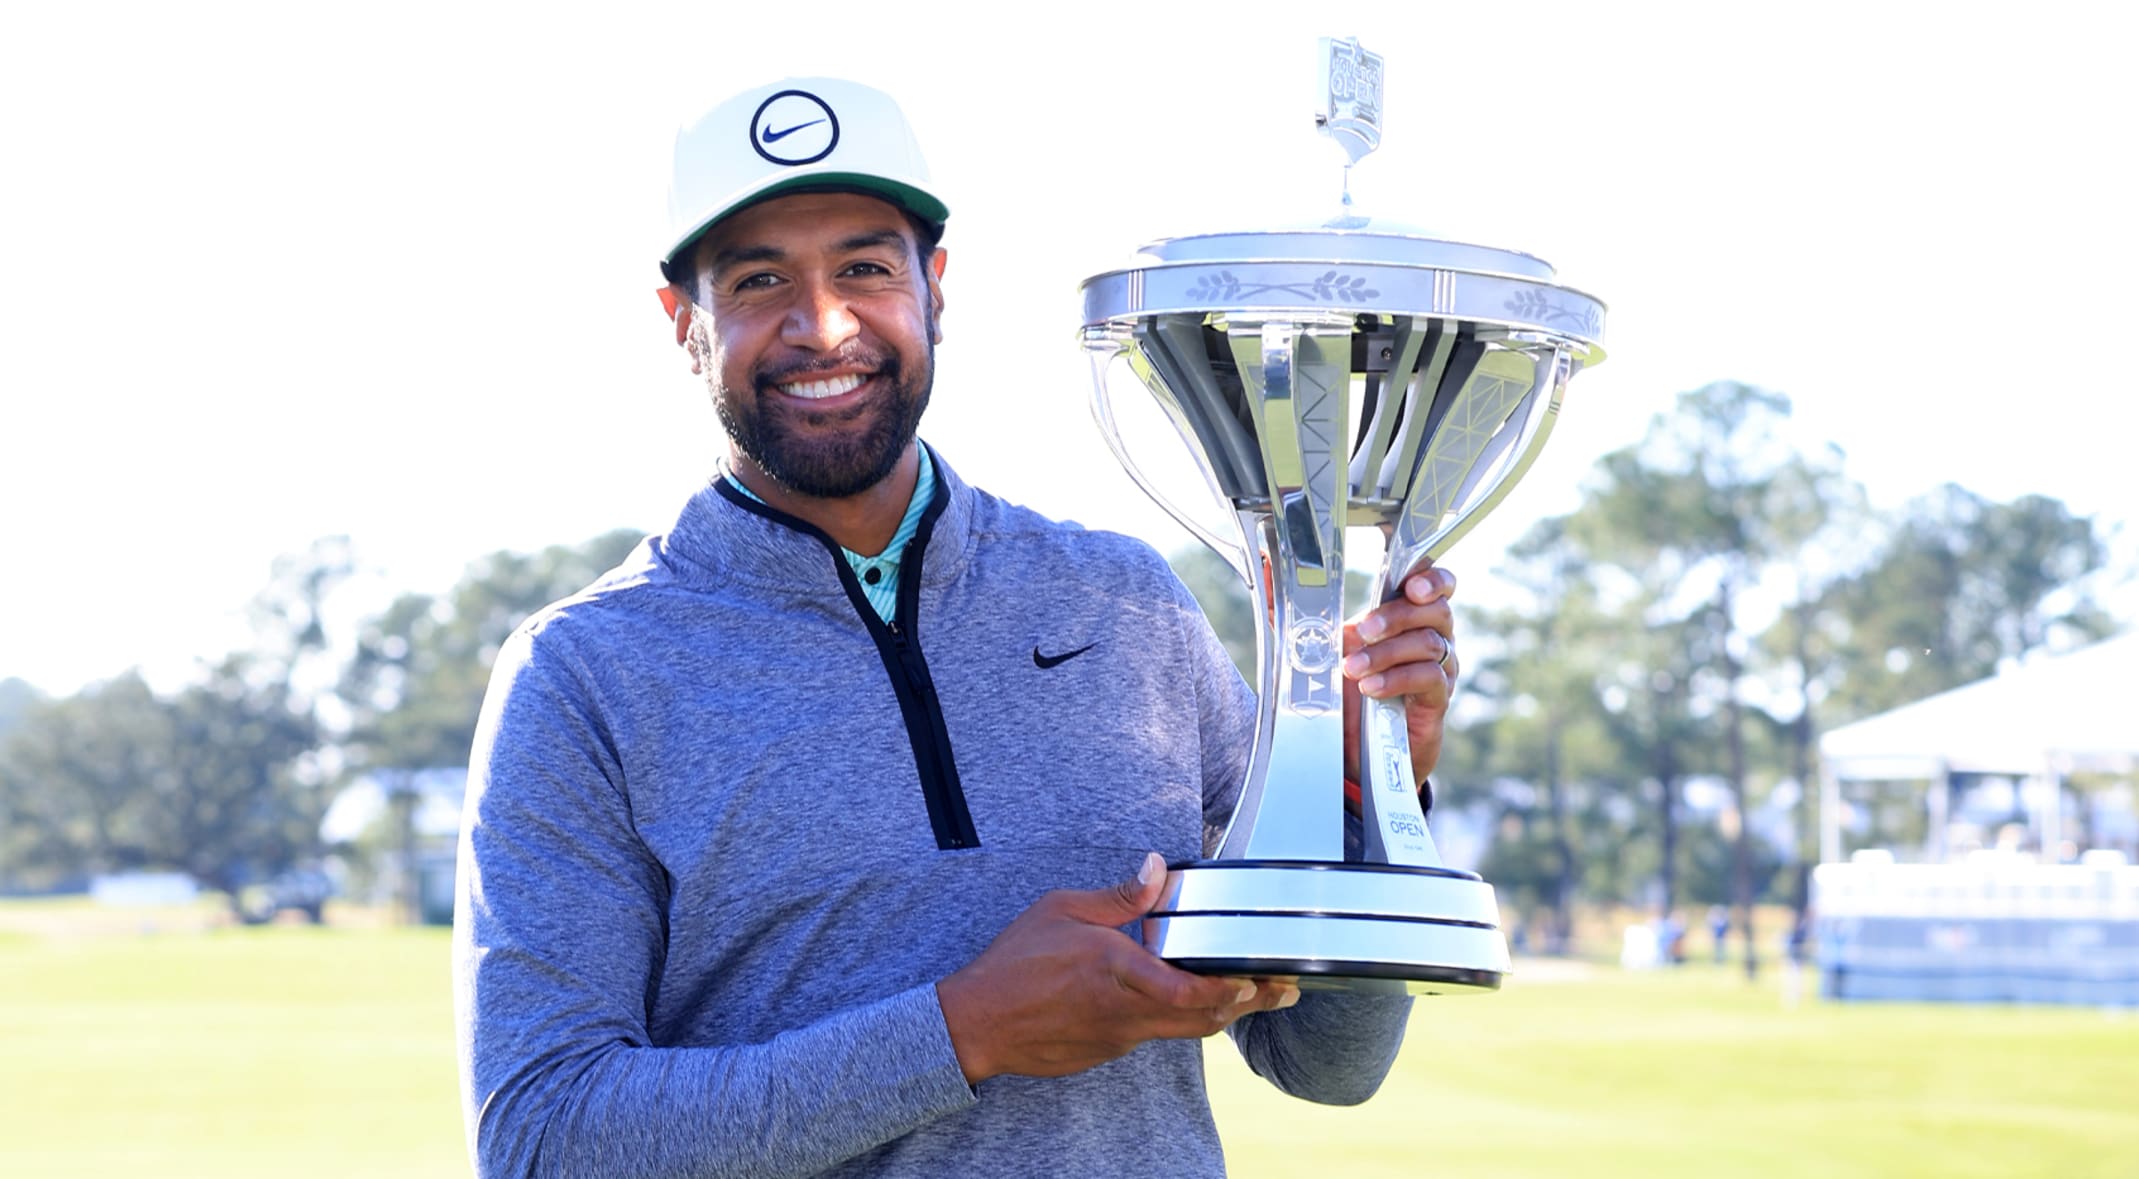 A well-rounded Tony Finau is fulfilling his potential